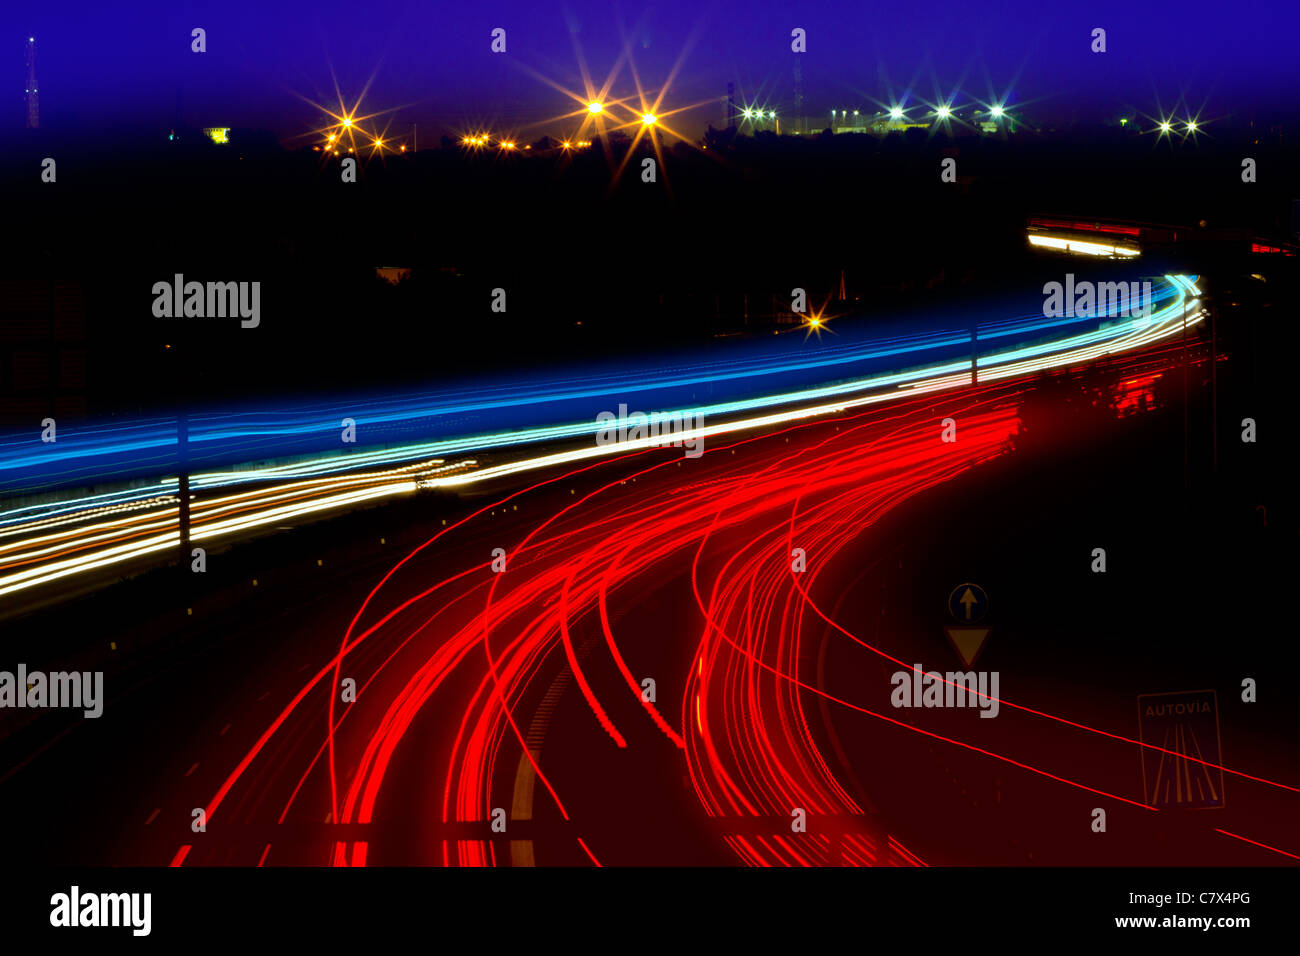 car light trails in red and white on night road curve Stock Photo